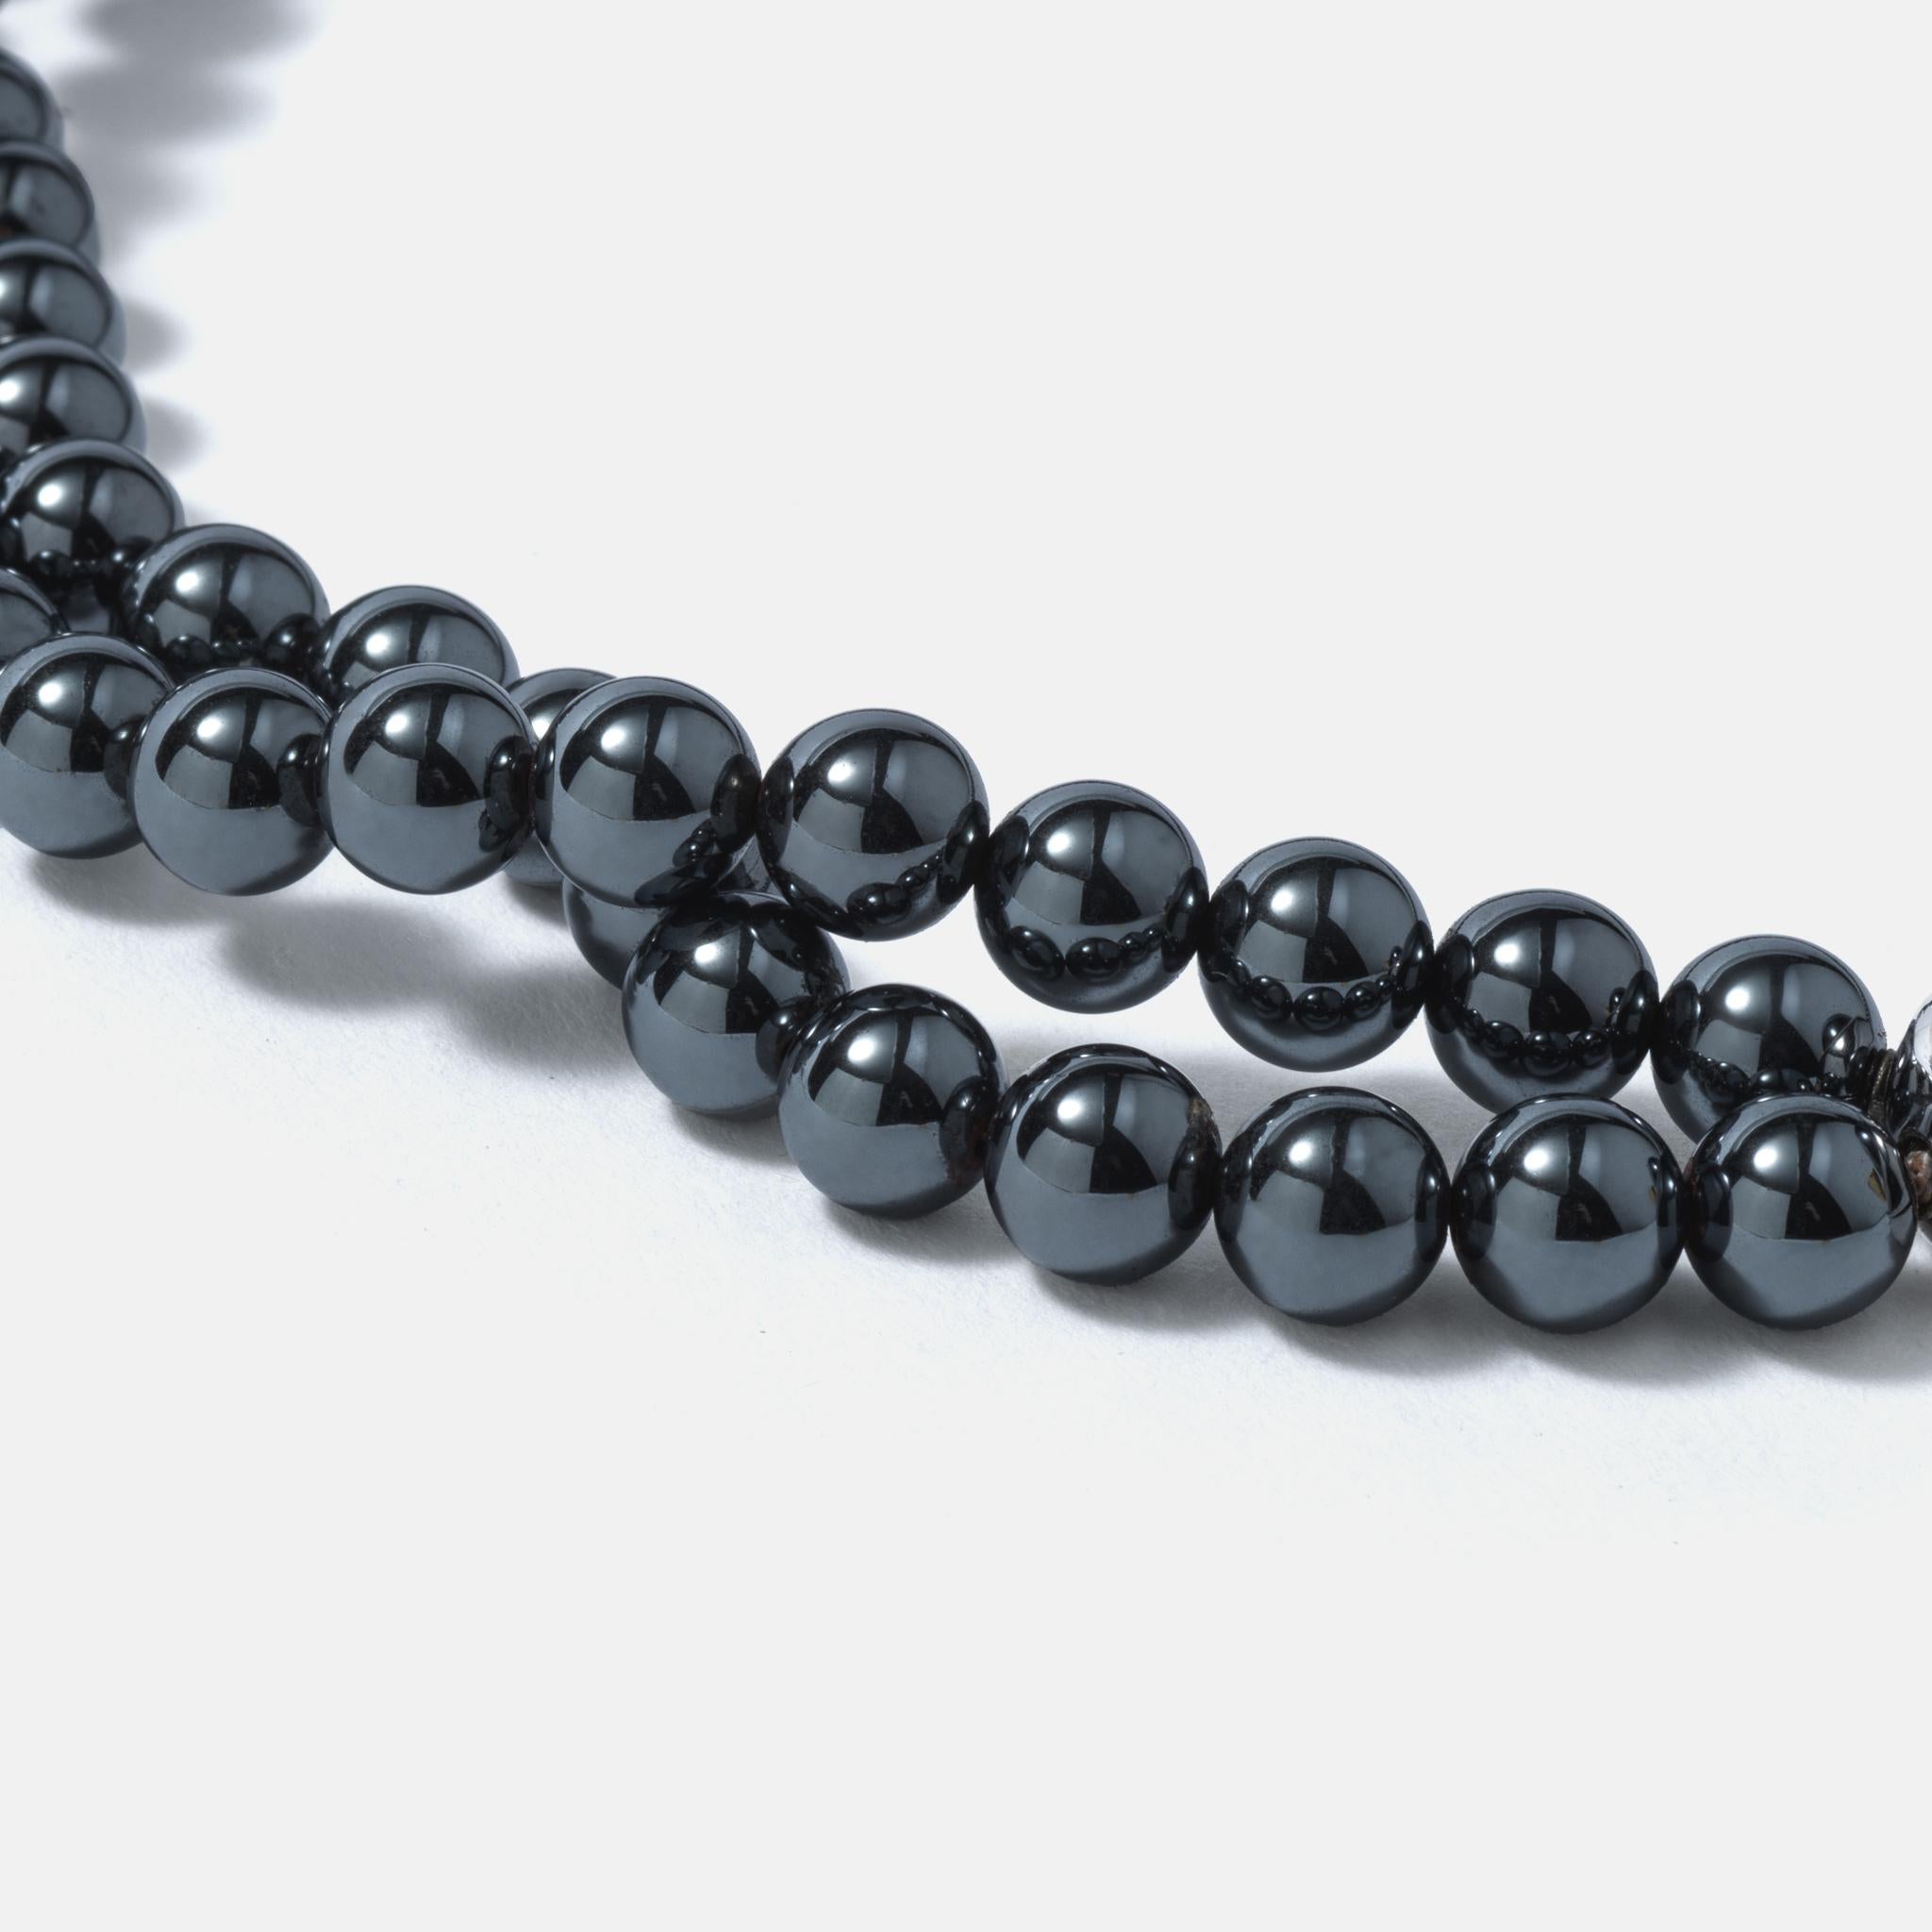 sterling silver & hematite necklace large ball statement jewellery women's